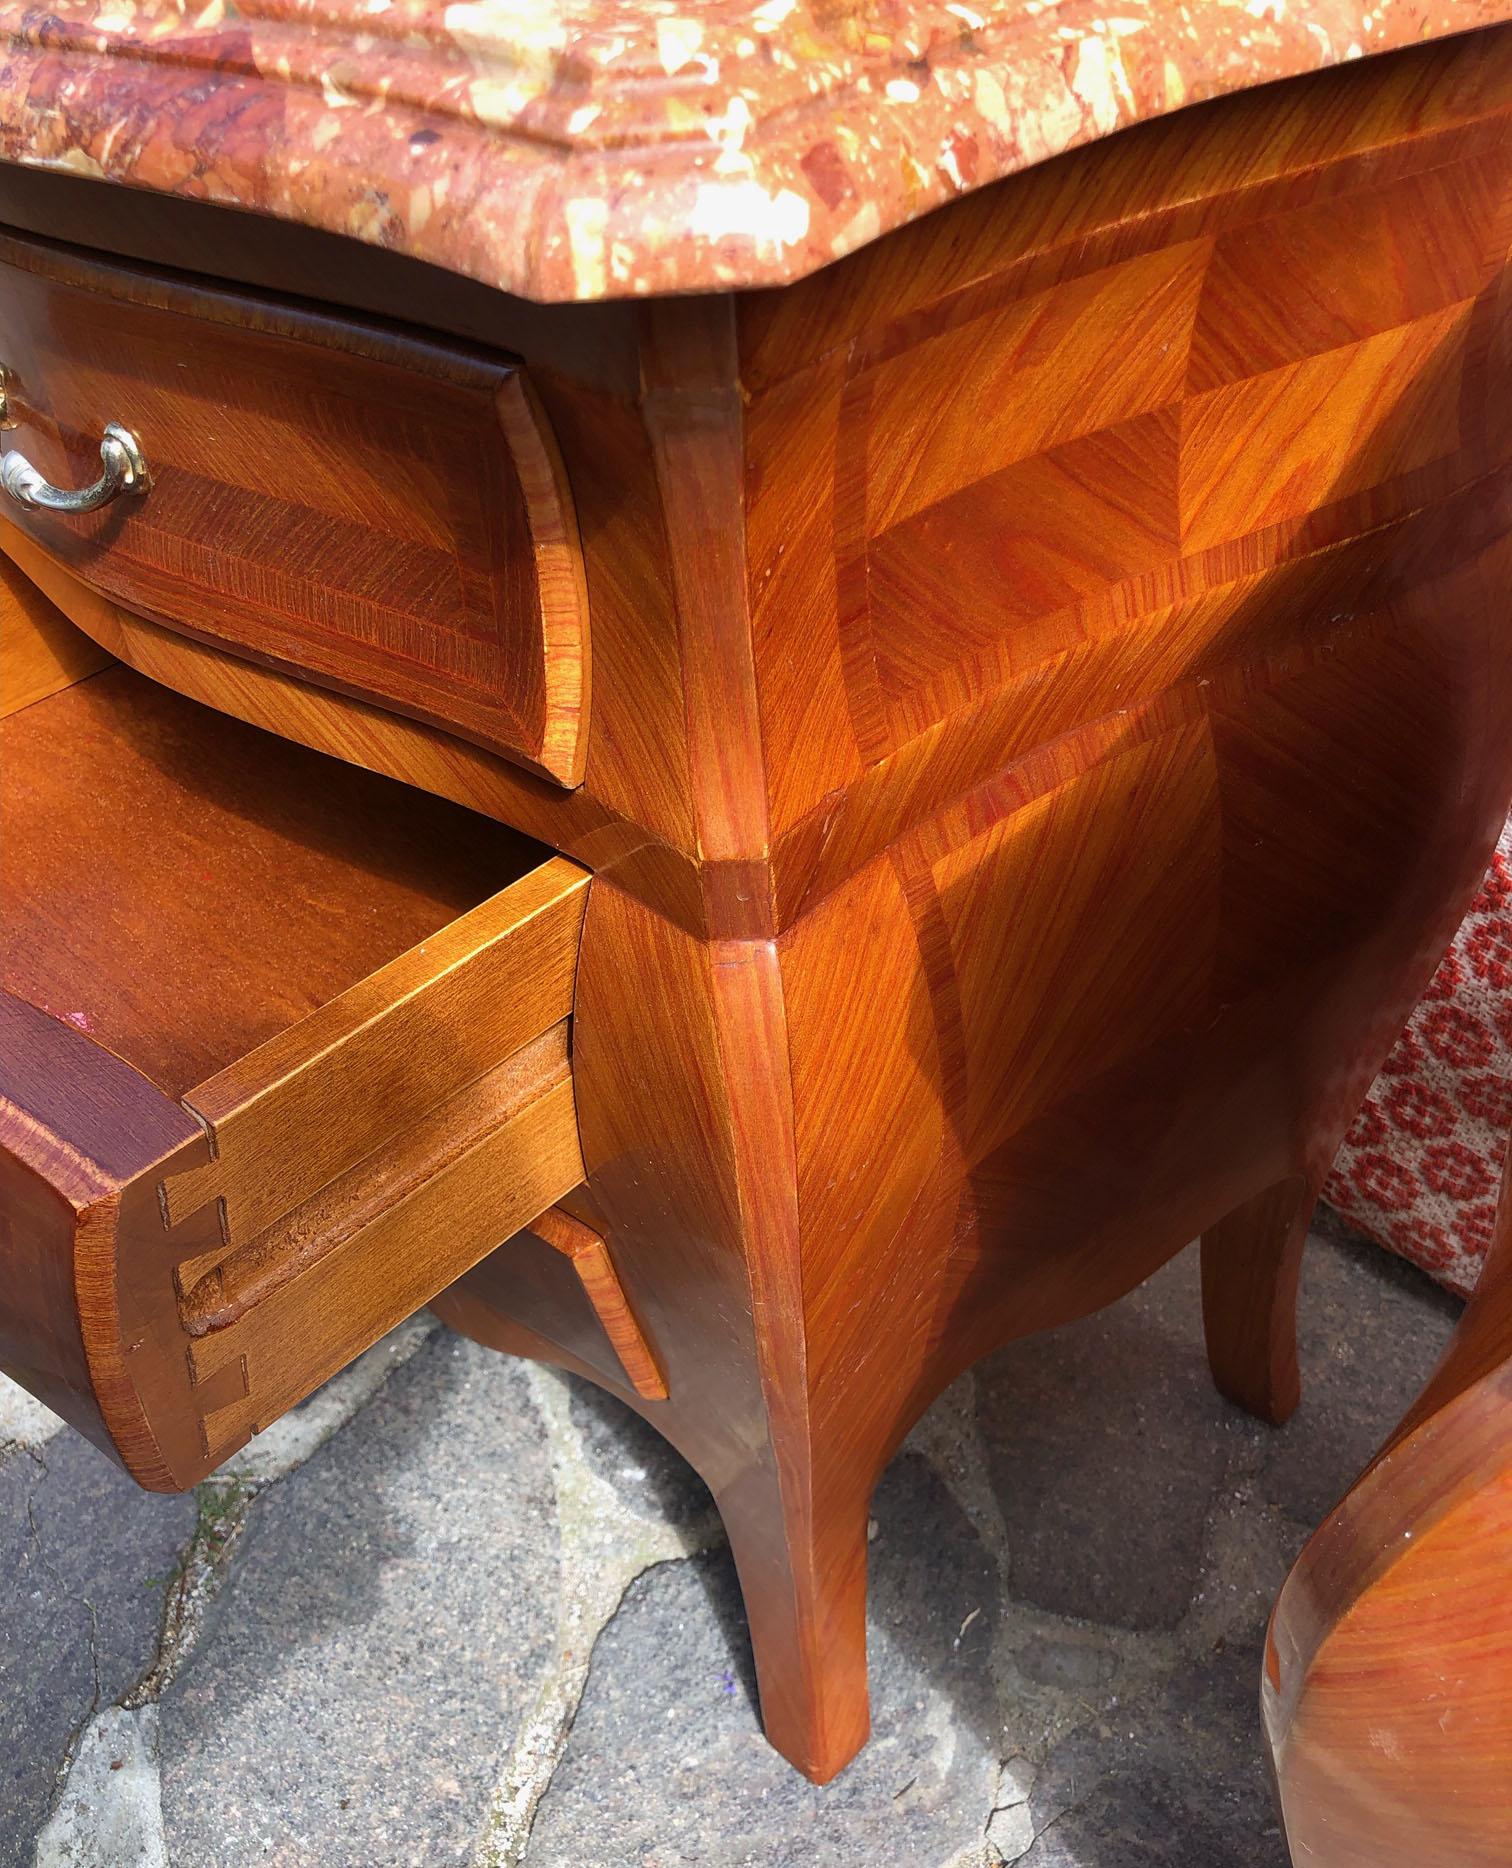 Pair of Italian night stands from the twentieth century, with a very elegant and worked pink marble top and three drawers.
Comes from an old elegant house in the Florence area of Tuscany.
As shown in the photographs and videos, there are no